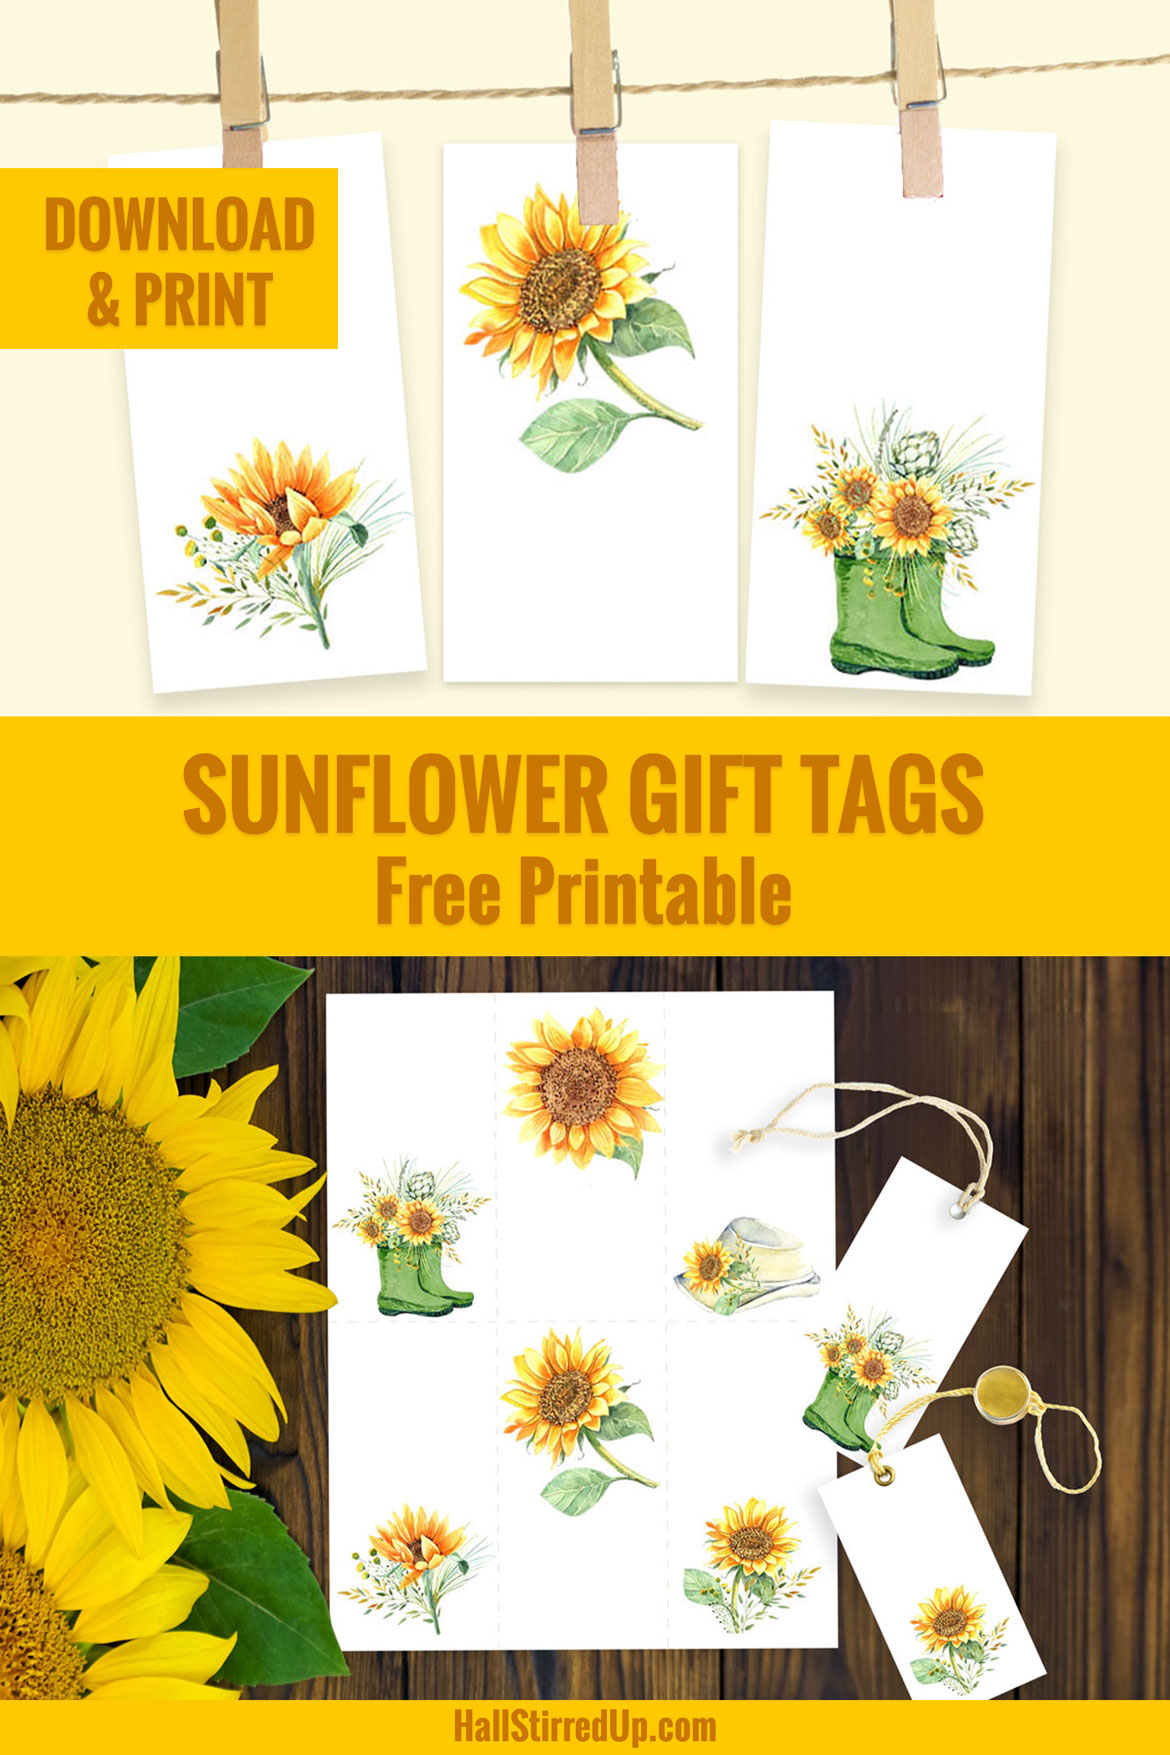 Download a free set of Sunflower gift tags!